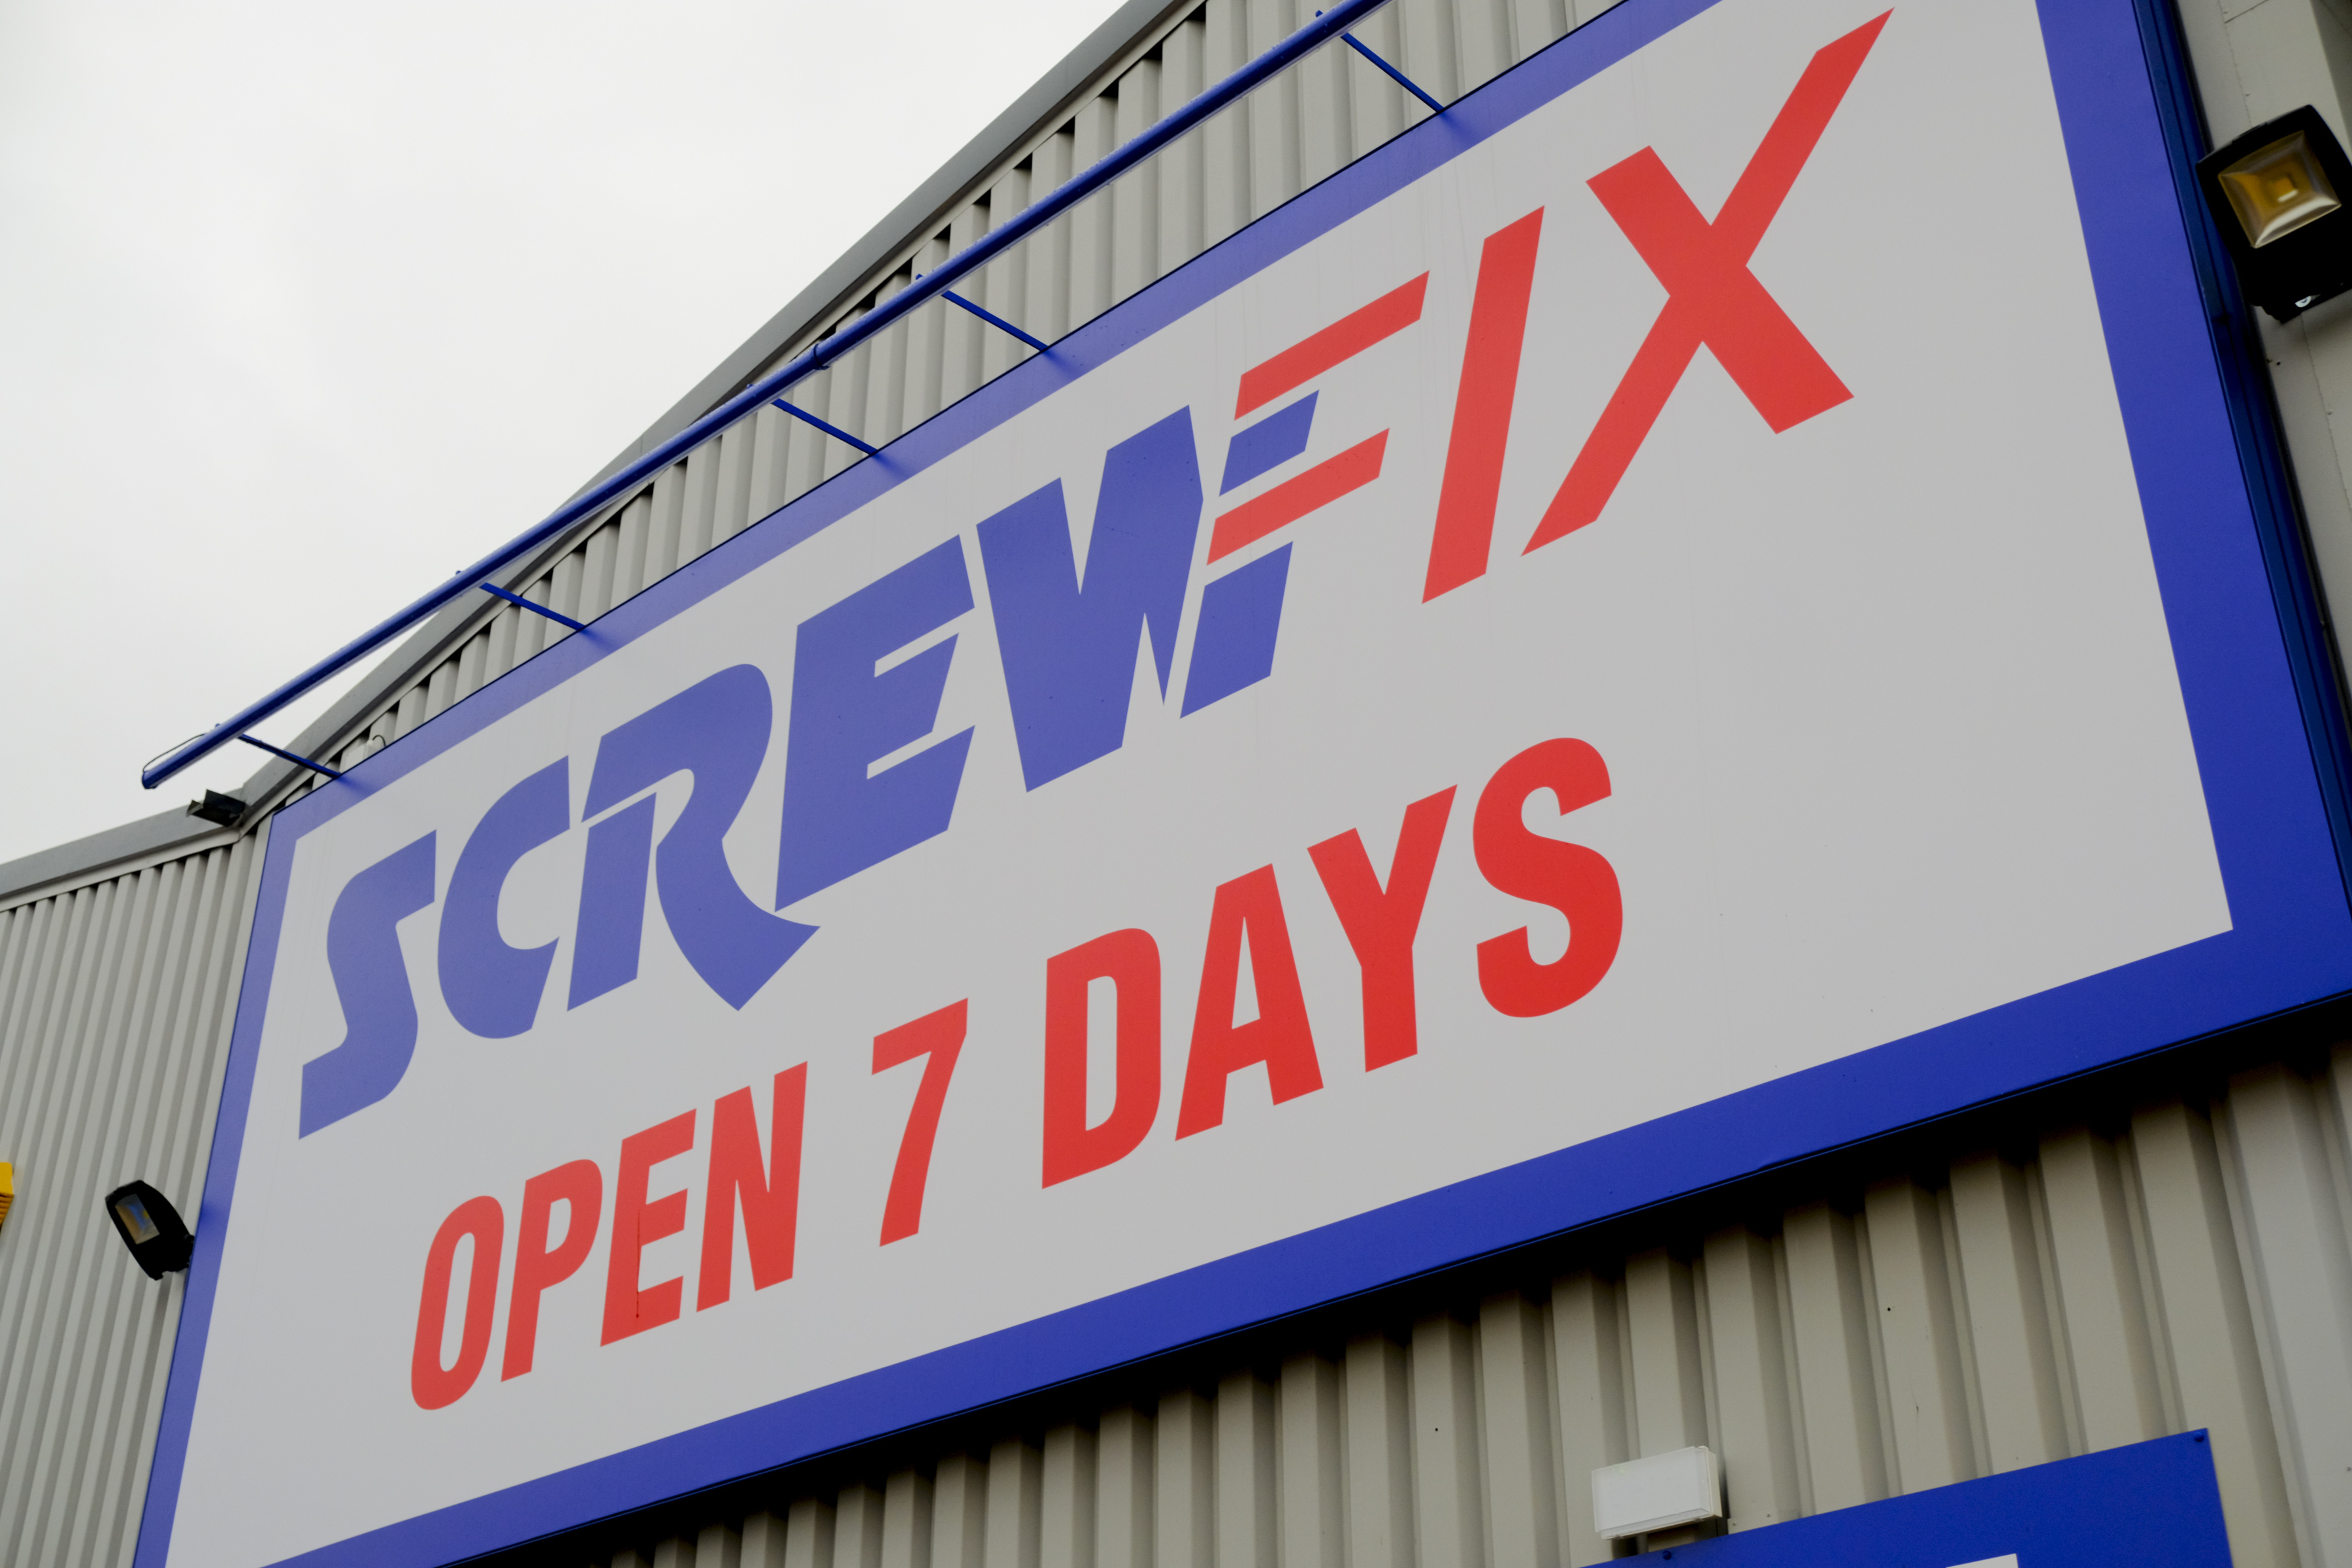 Screwfix to arrive in Hither Green in February